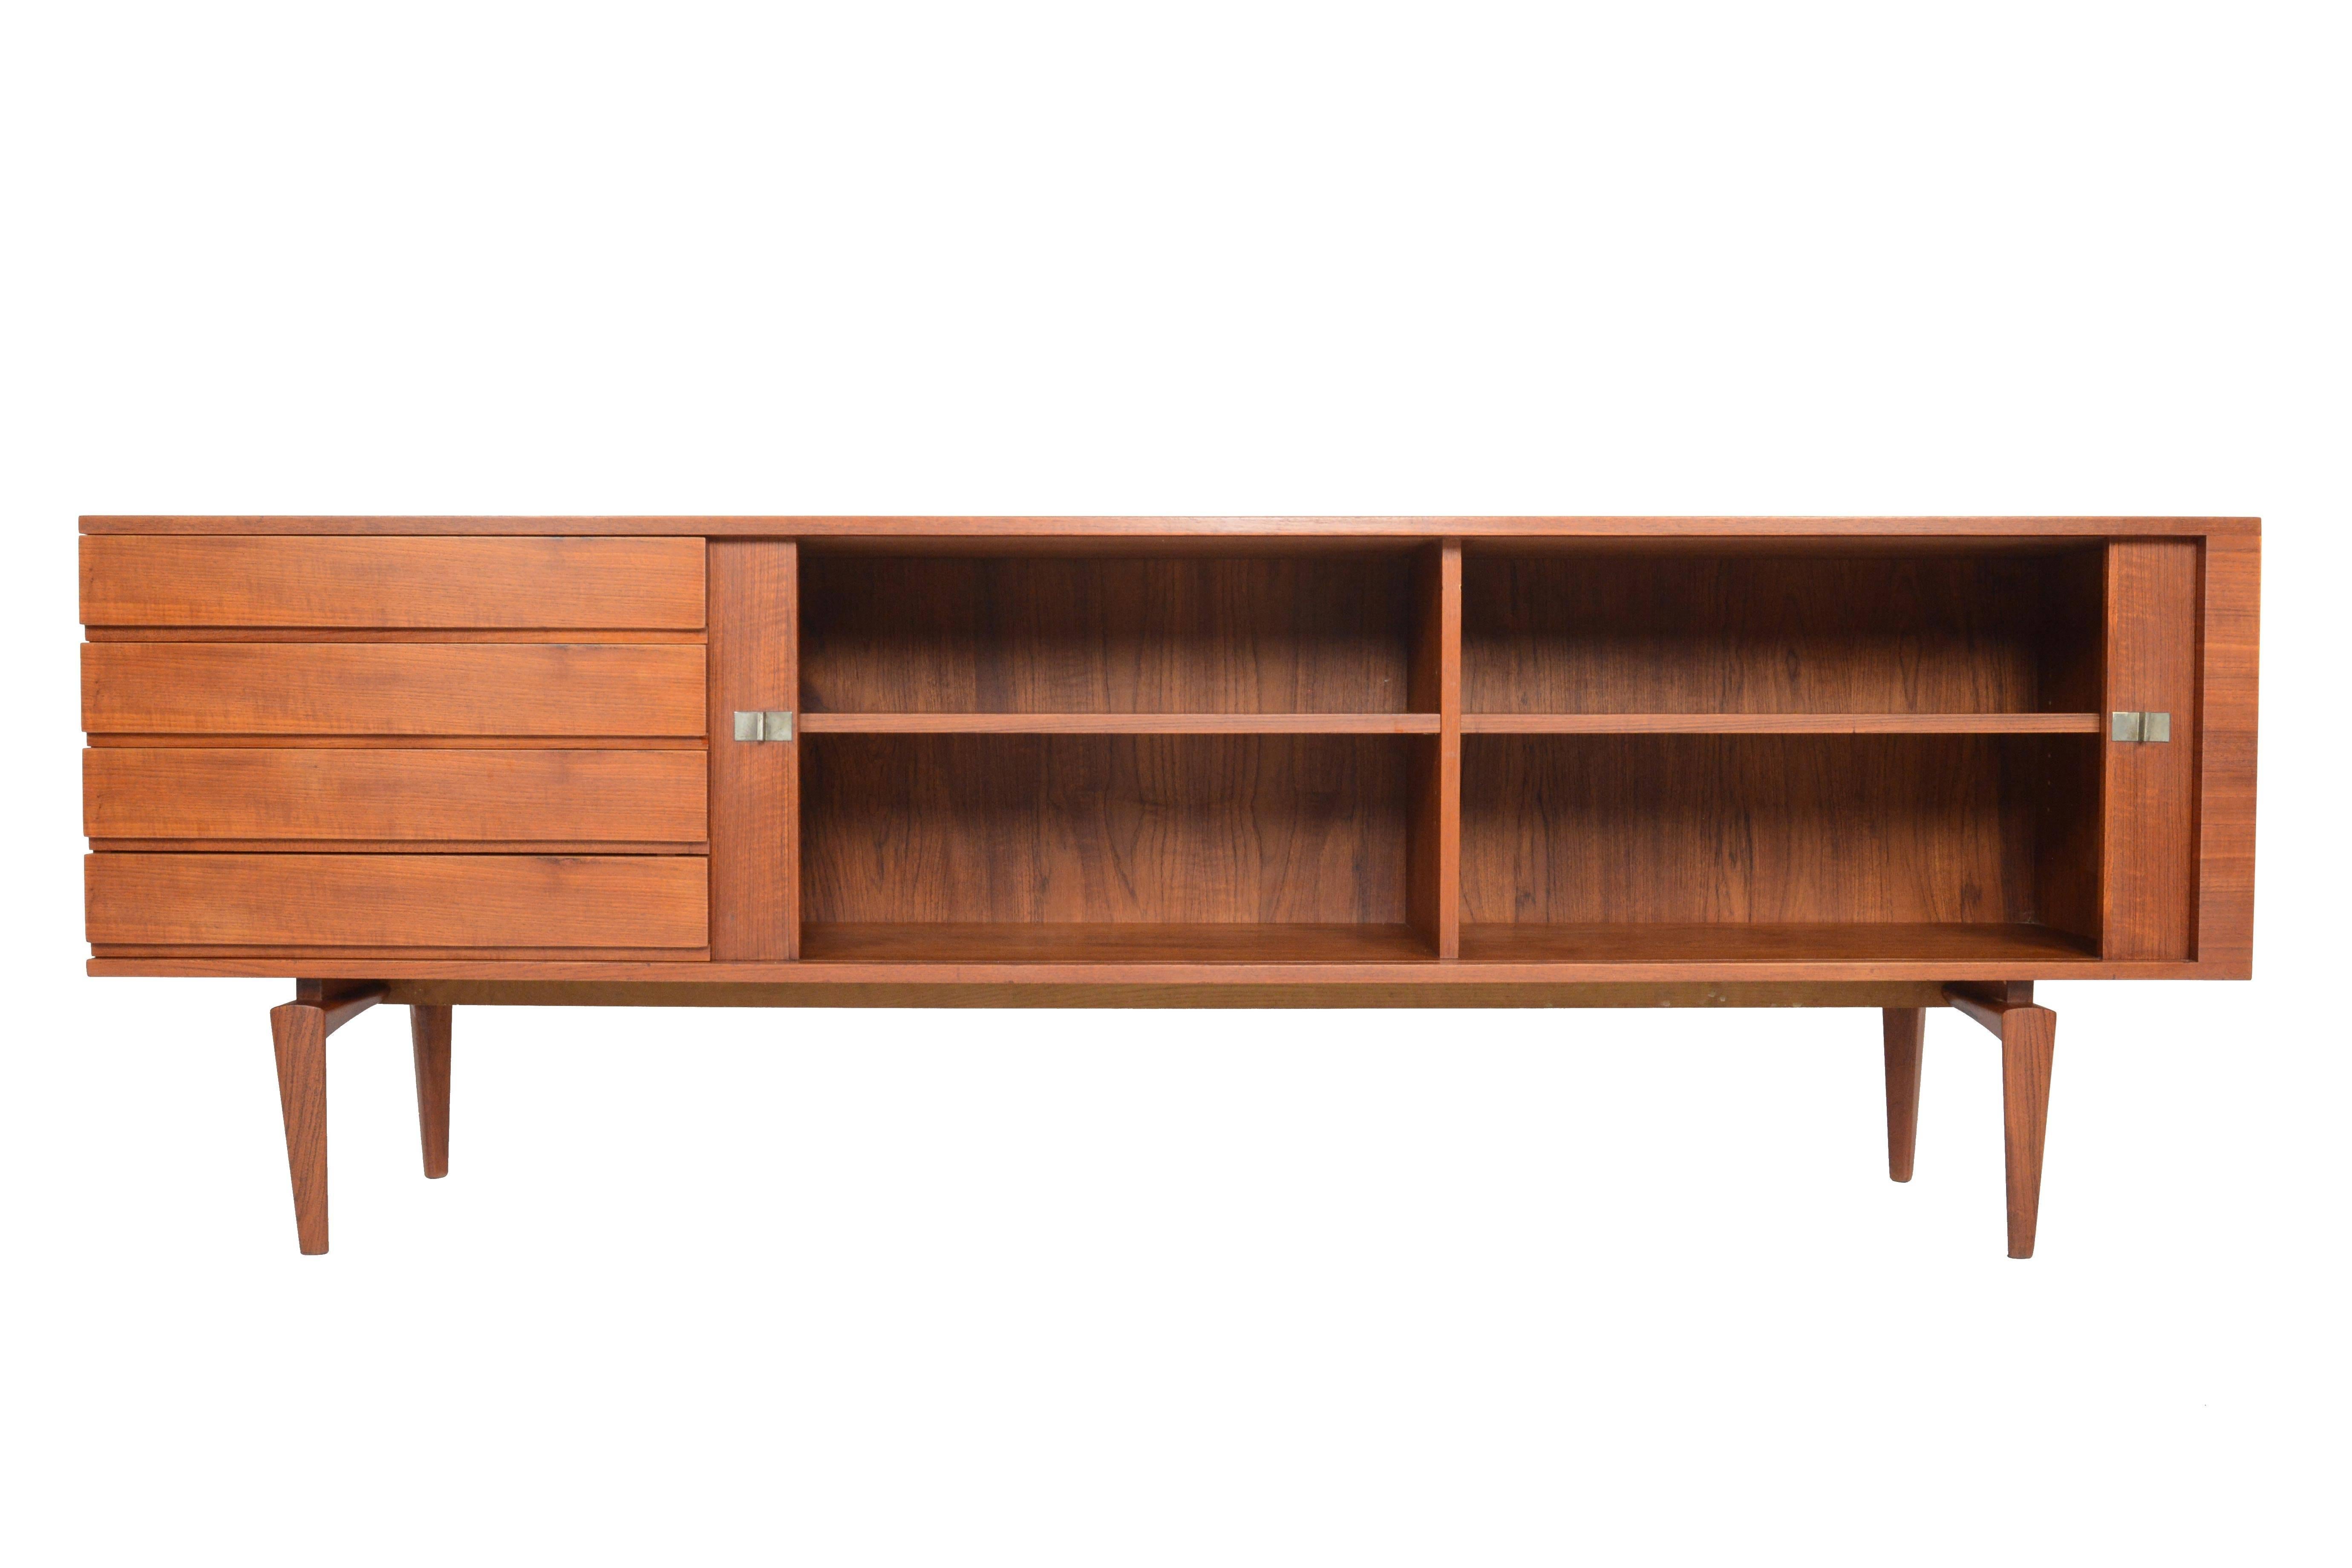 This gorgeous Danish modern tambour door credenza in teak was designed by H.W. Klein for Bramin in the 1960s. This stunning piece will be the highlight of any midcentury collection, offering two large tambour doors with steel pulls. The interior